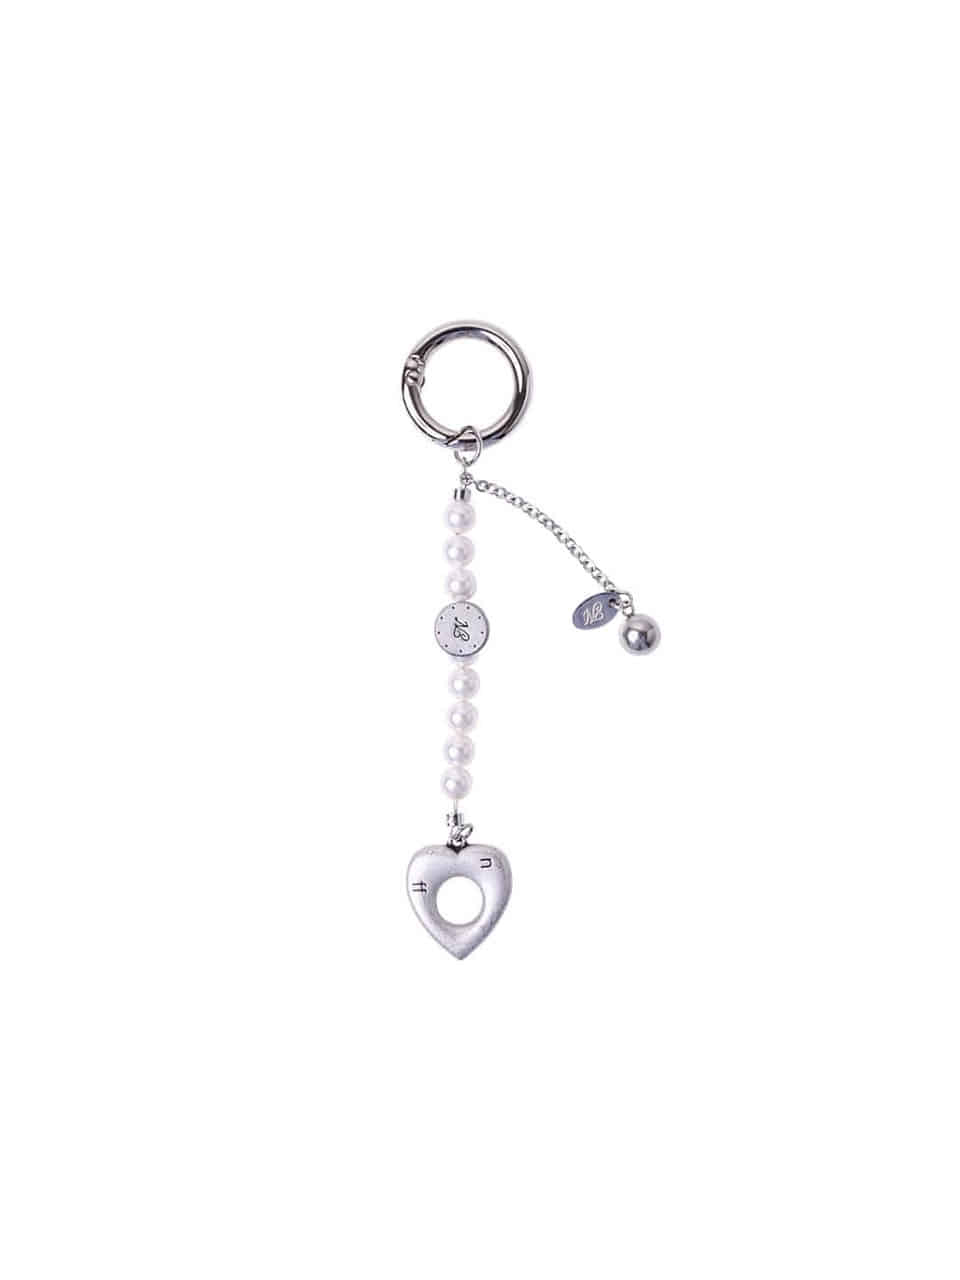 NFF - HEART CHARM KEY RING (SILVER)